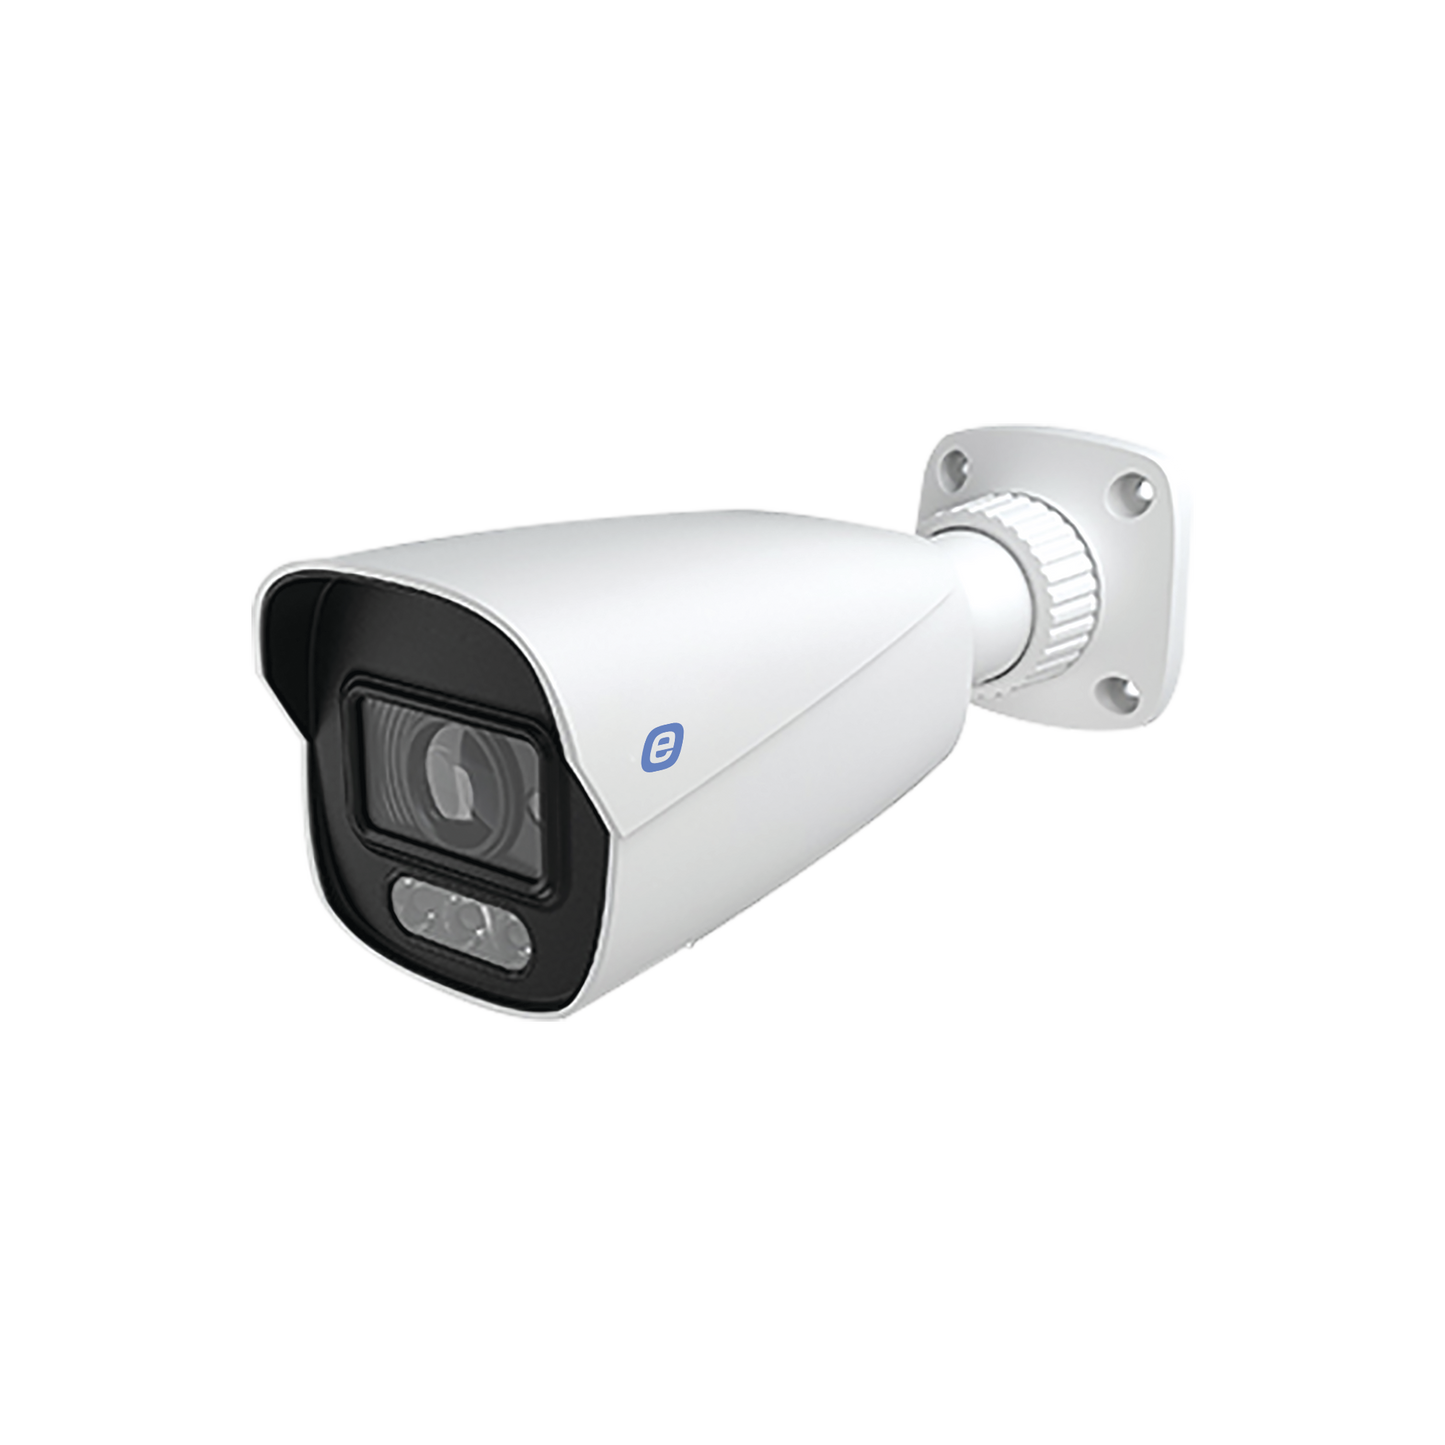 IP Bullet 5MP / POE / 24/7 Color / Advanced videoanalytics / 98ft (30m) White Light / WDR / Micro SD / IP67 / 2.8 mm Lens / Cloud Video Recording / Metal